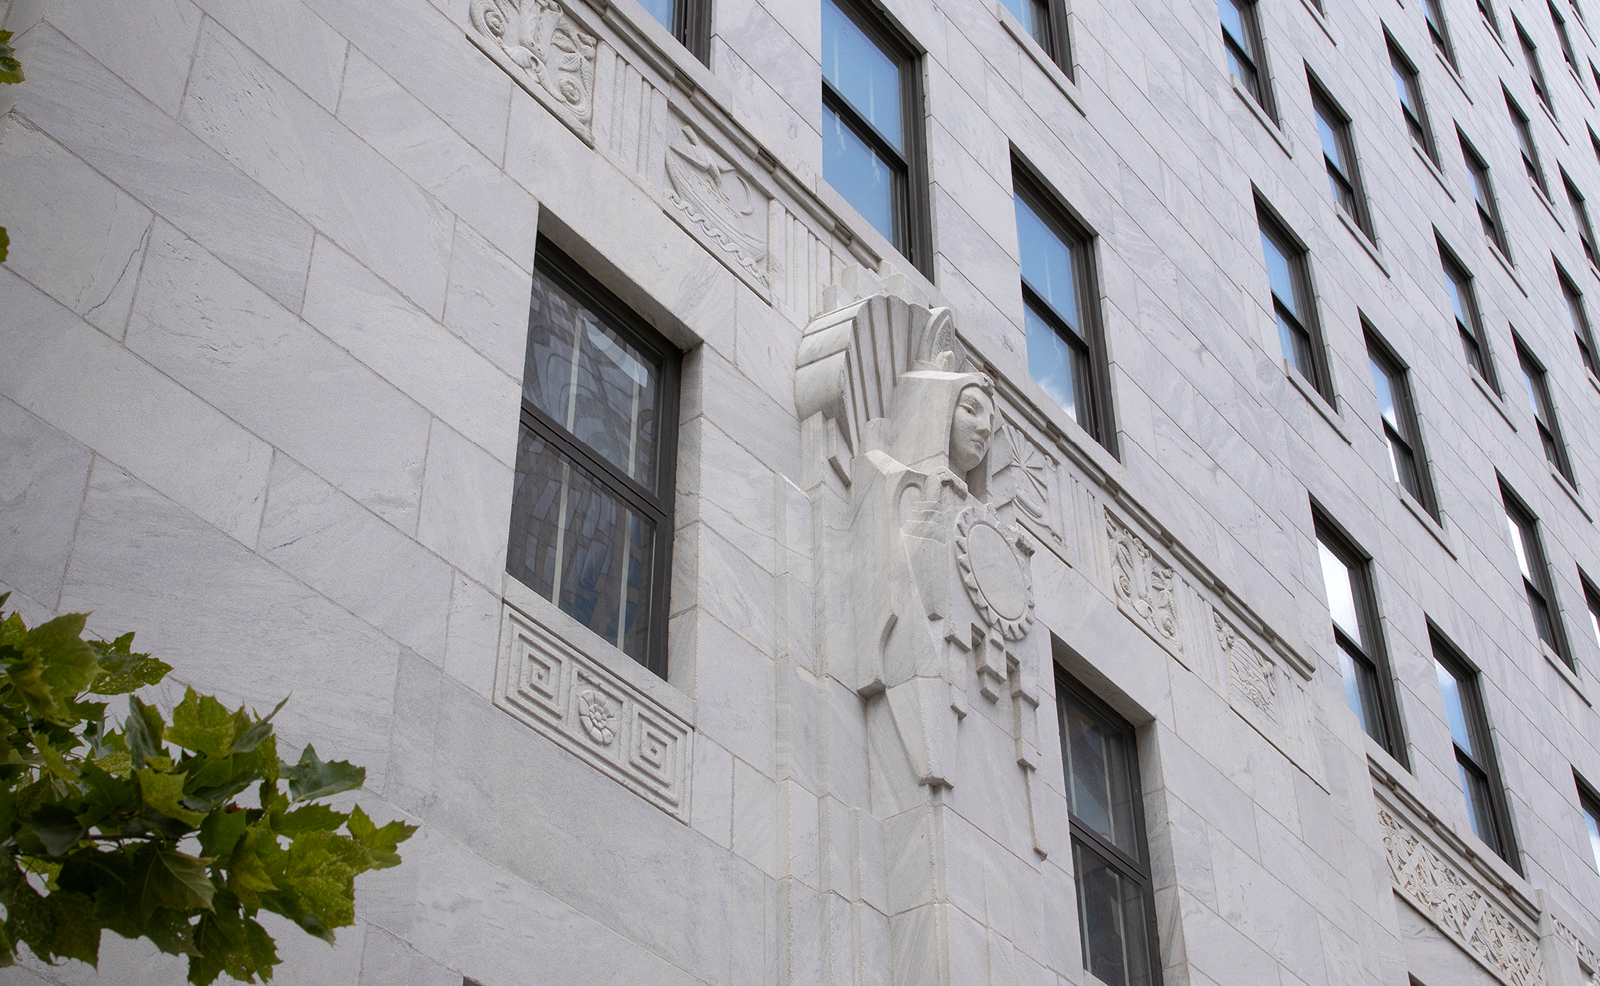 Image of a sculpture that appears to hold a sun carved on the south end of the Thomas J. Moyer Ohio Judicial Center